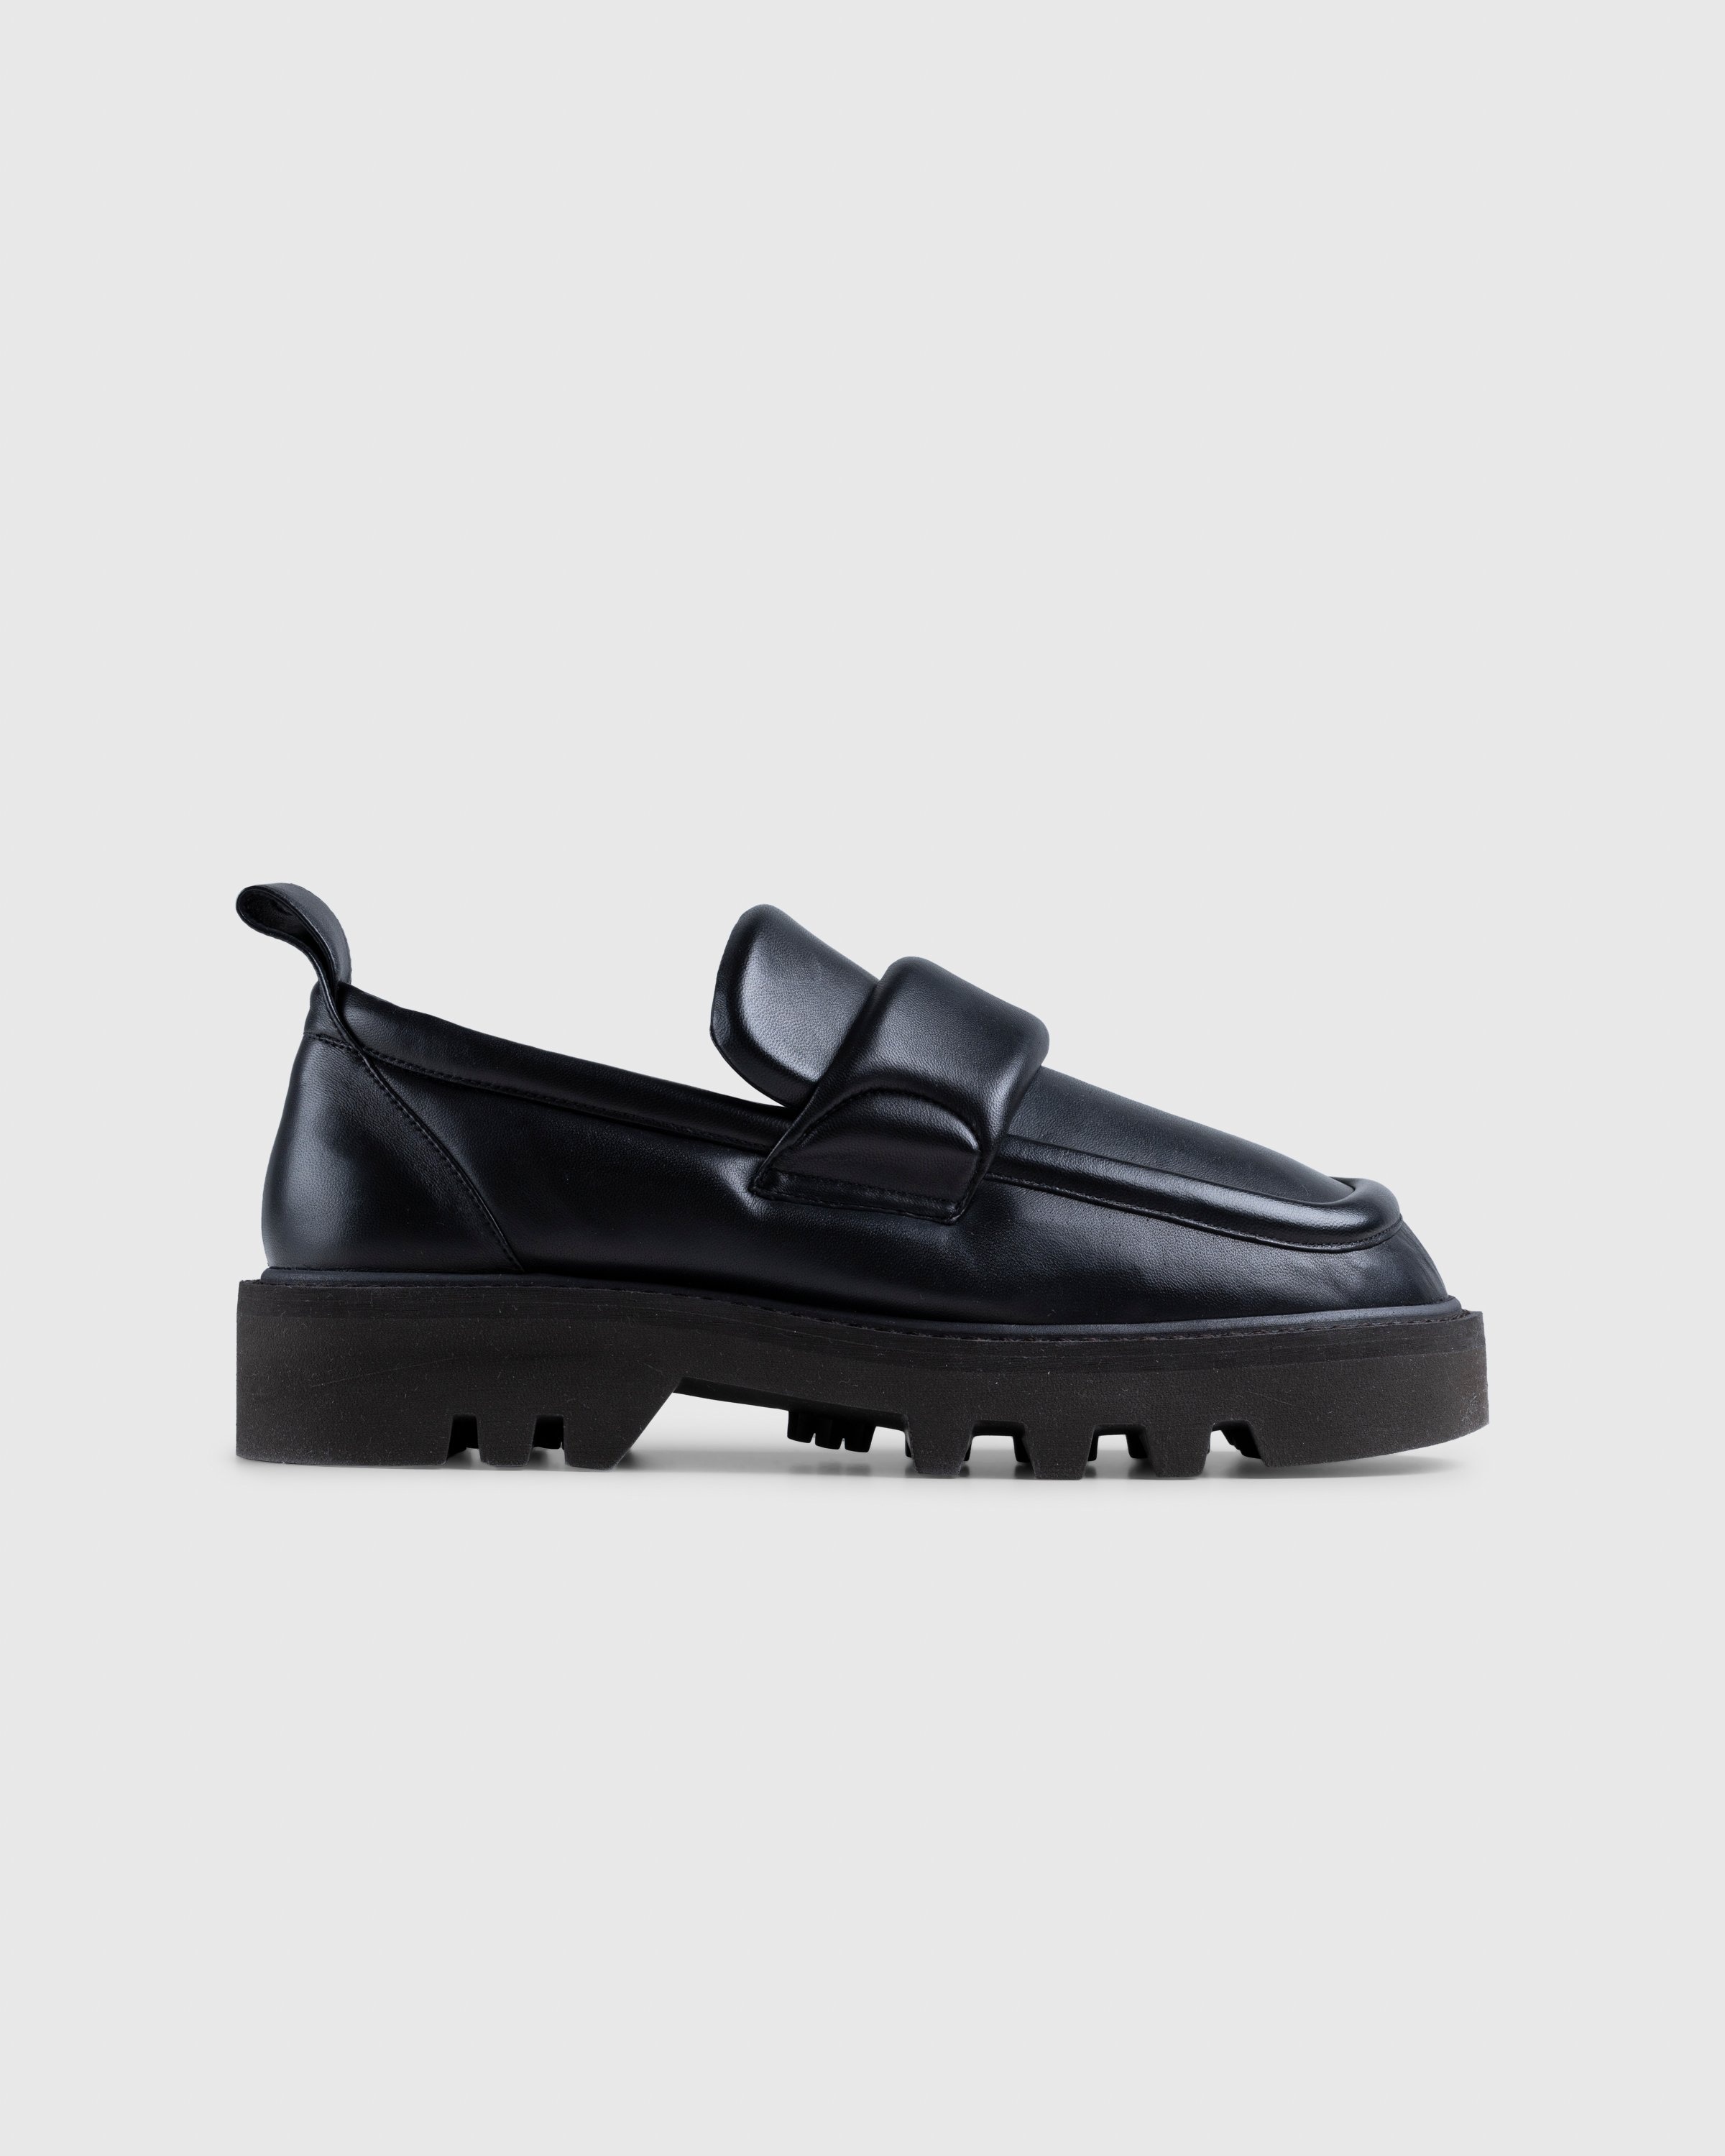 Dries van Noten – Padded Leather Loafers Black - Sandals - Black - Image 1